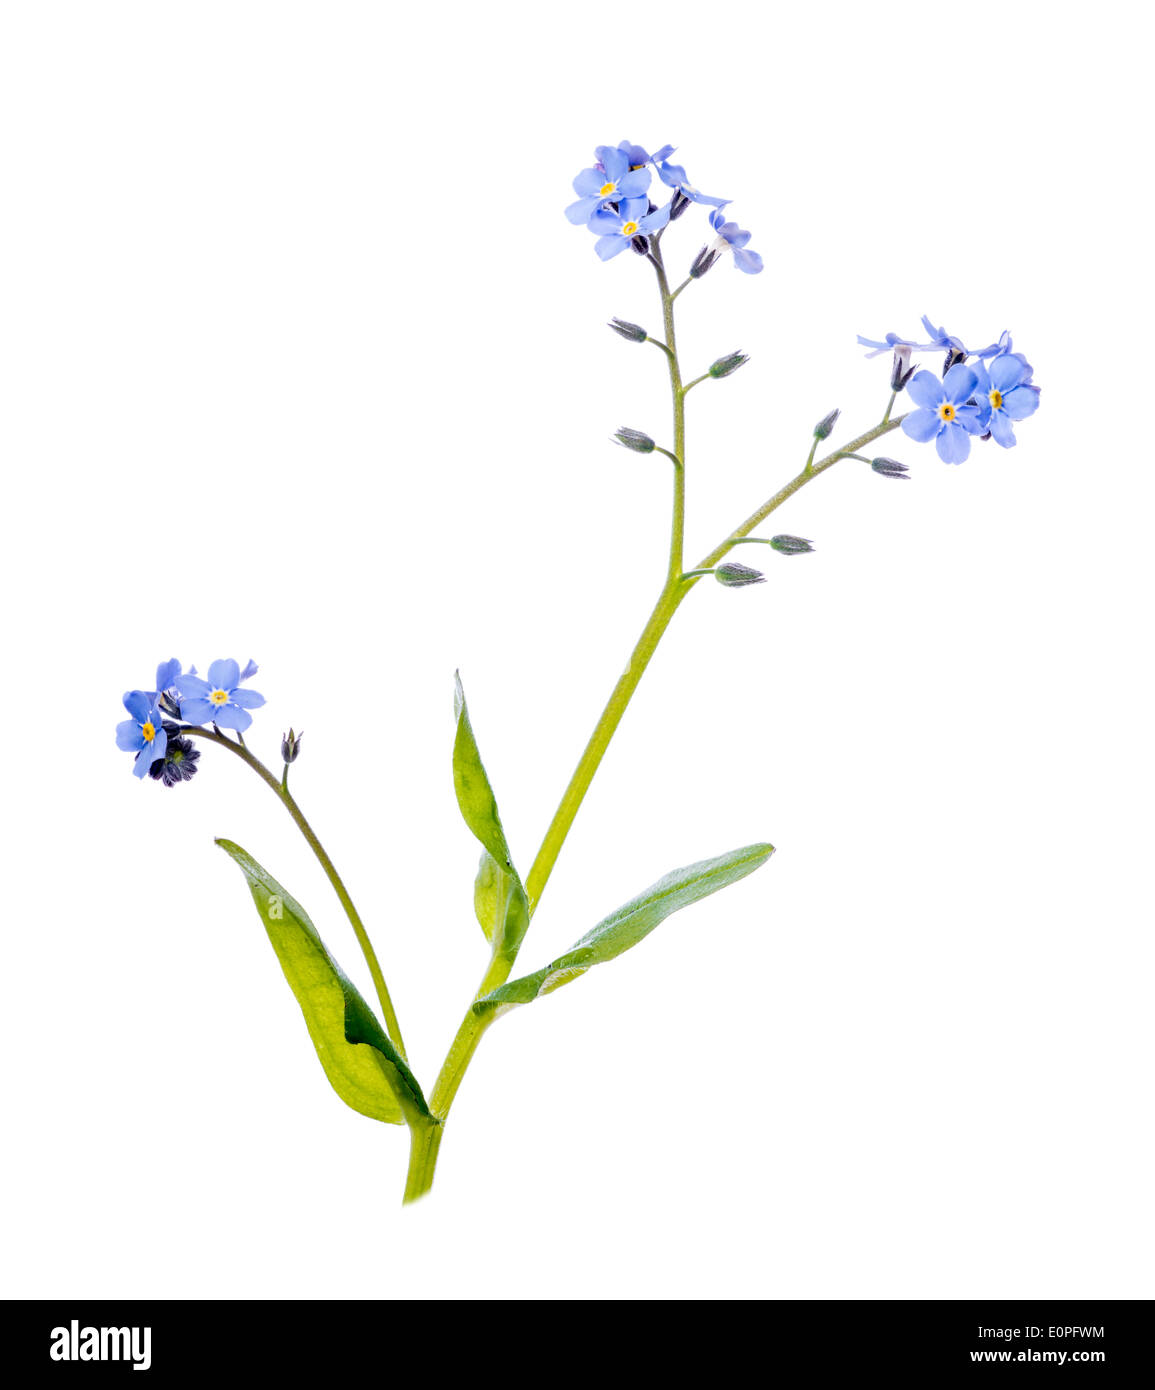 Forget me not, against a white background. Stock Photo